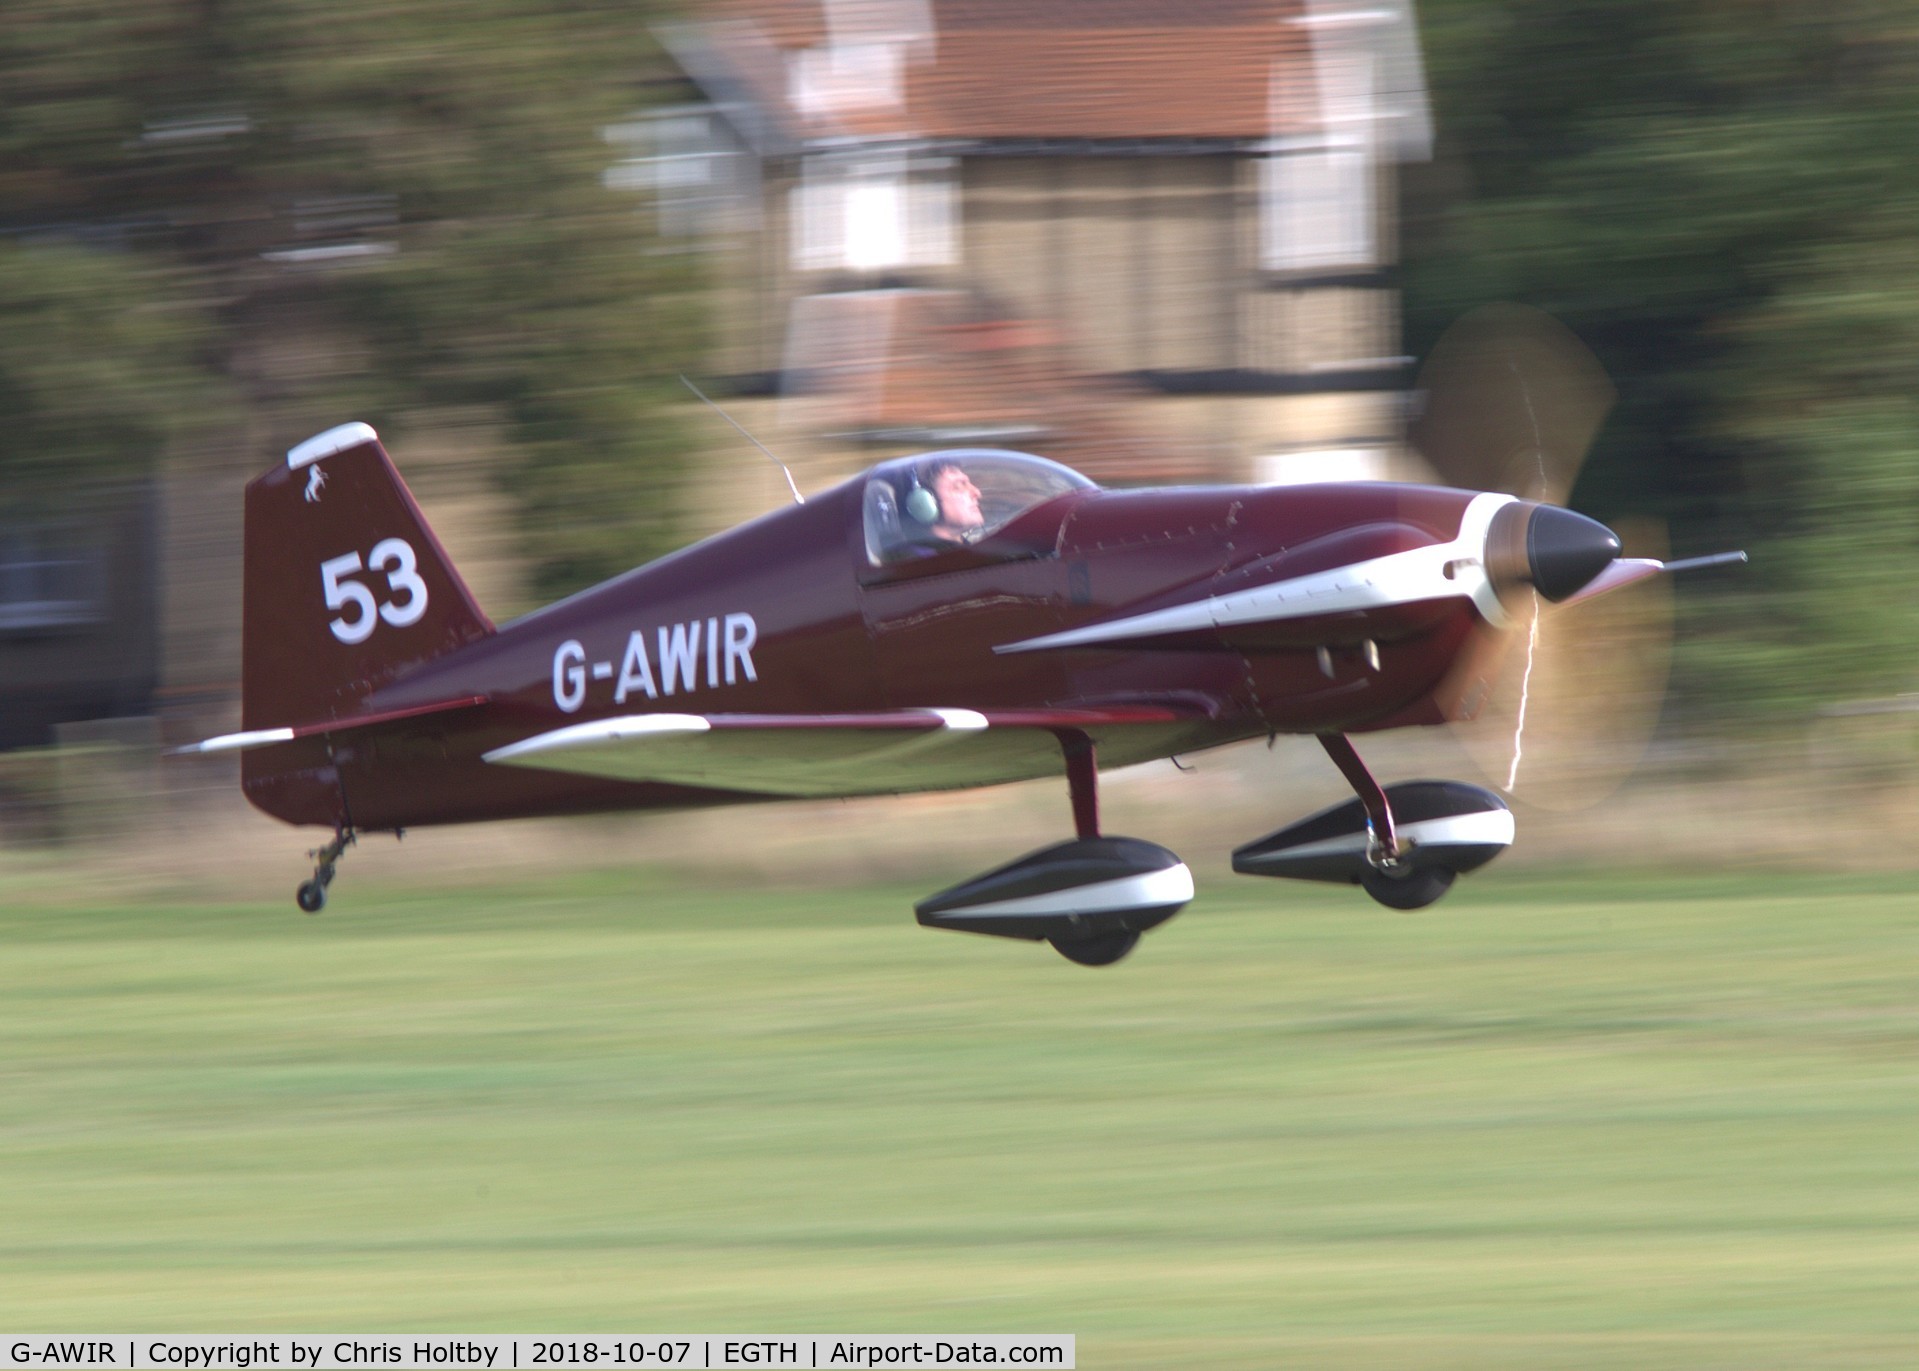 G-AWIR, 1973 Mustang Aeronautics Midget Mustang MM-1 C/N PFA 1315, At the Shuttleworth Race Day 2018. Privately owned now in Kettering.